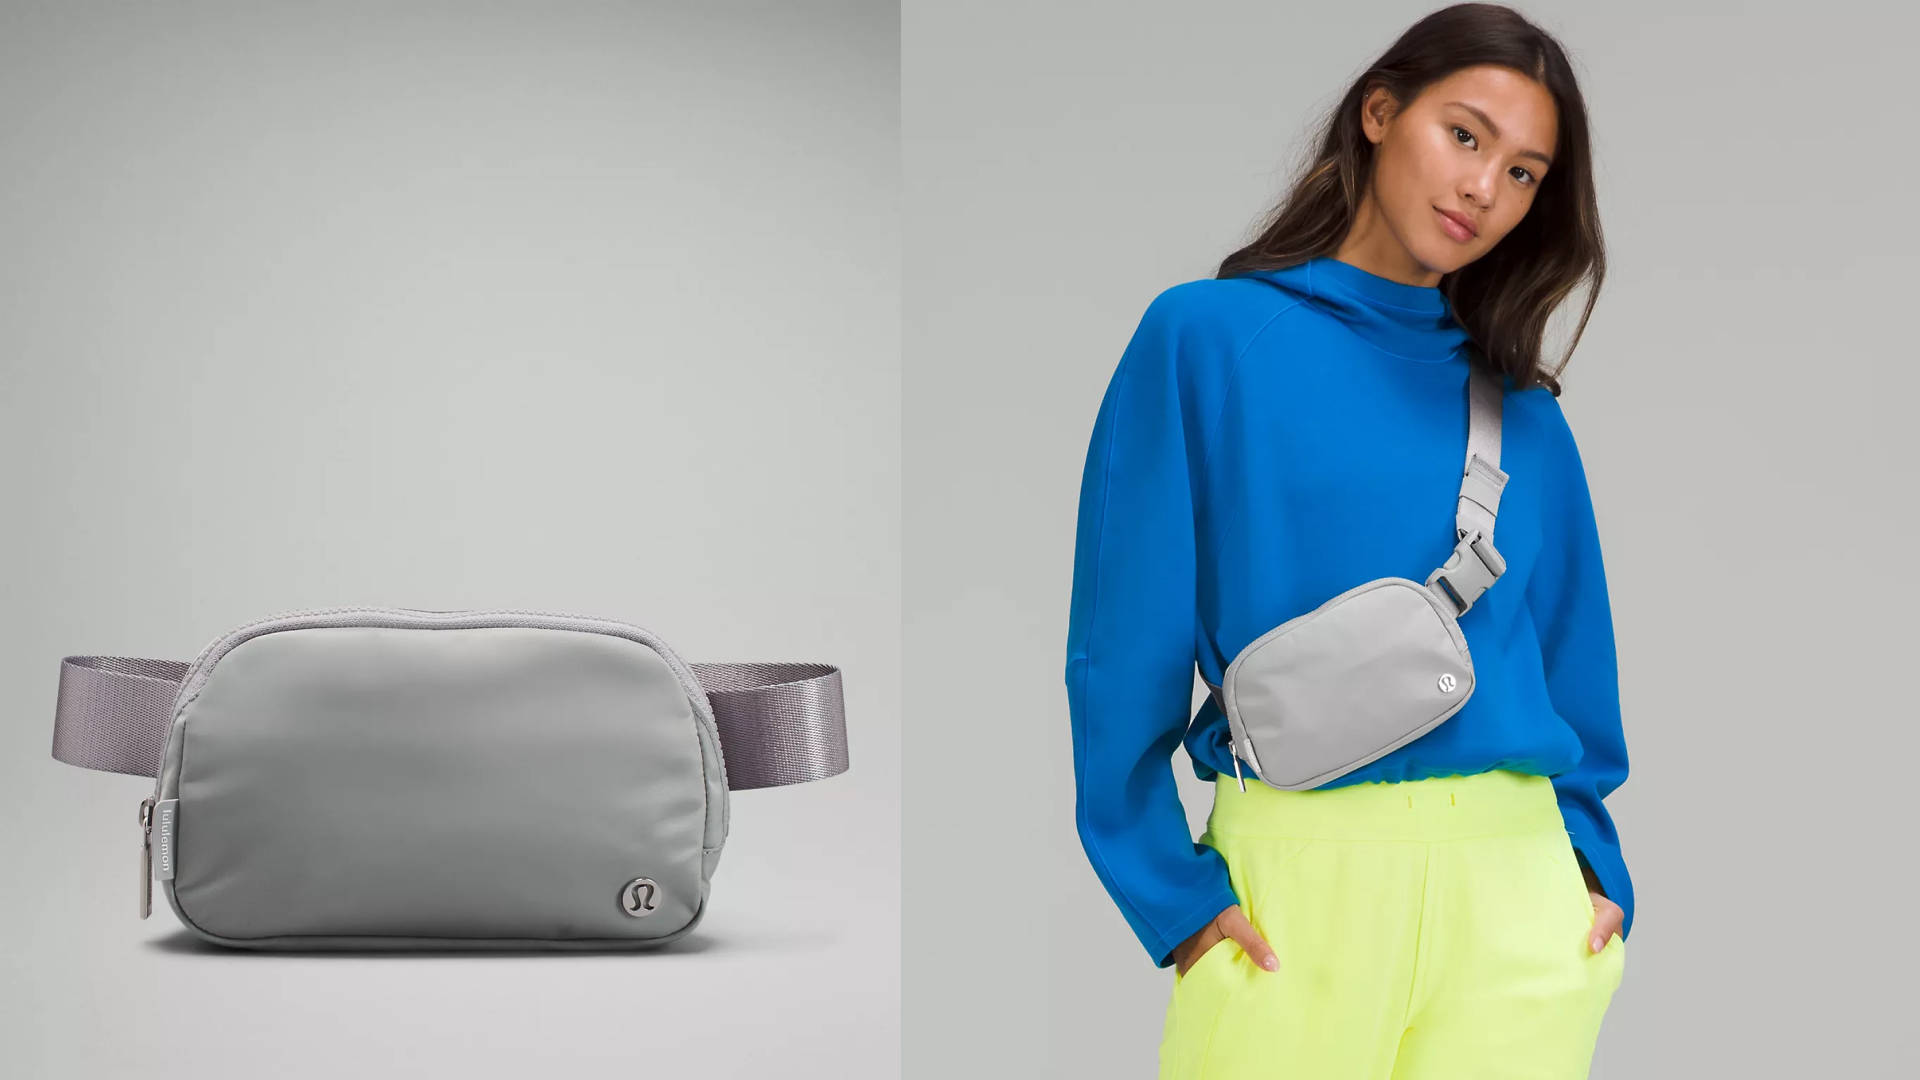 The Look For Less: Hermés Lindy - $5,900 vs. $47.74 - THE BALLER ON A  BUDGET - An Affordable Fashion, Beauty & Lifestyle Blog